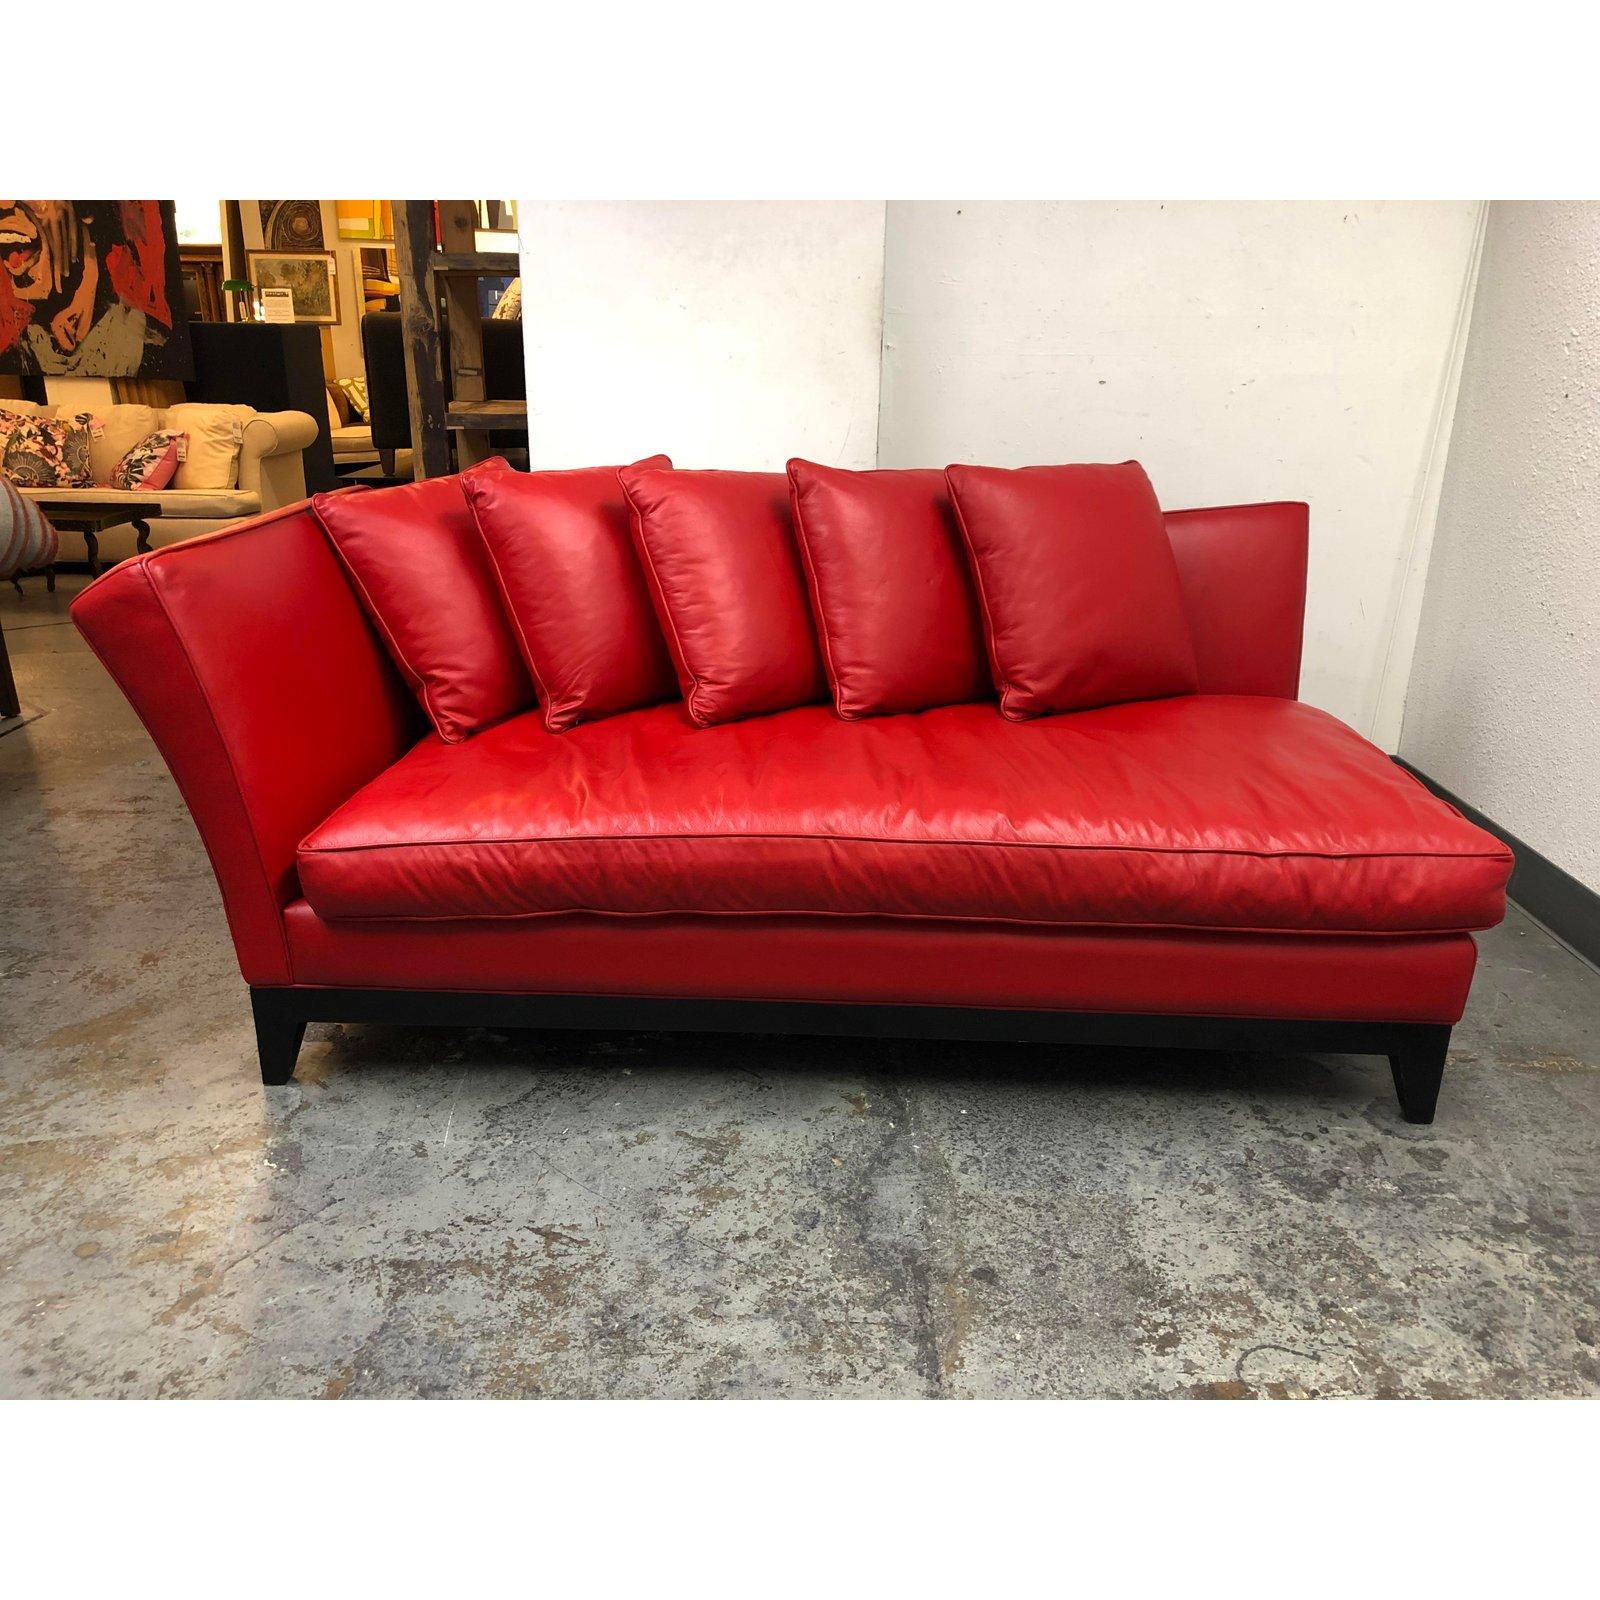 Contemporary Custom Red Leather Chaise Sofa Lounge For Sale